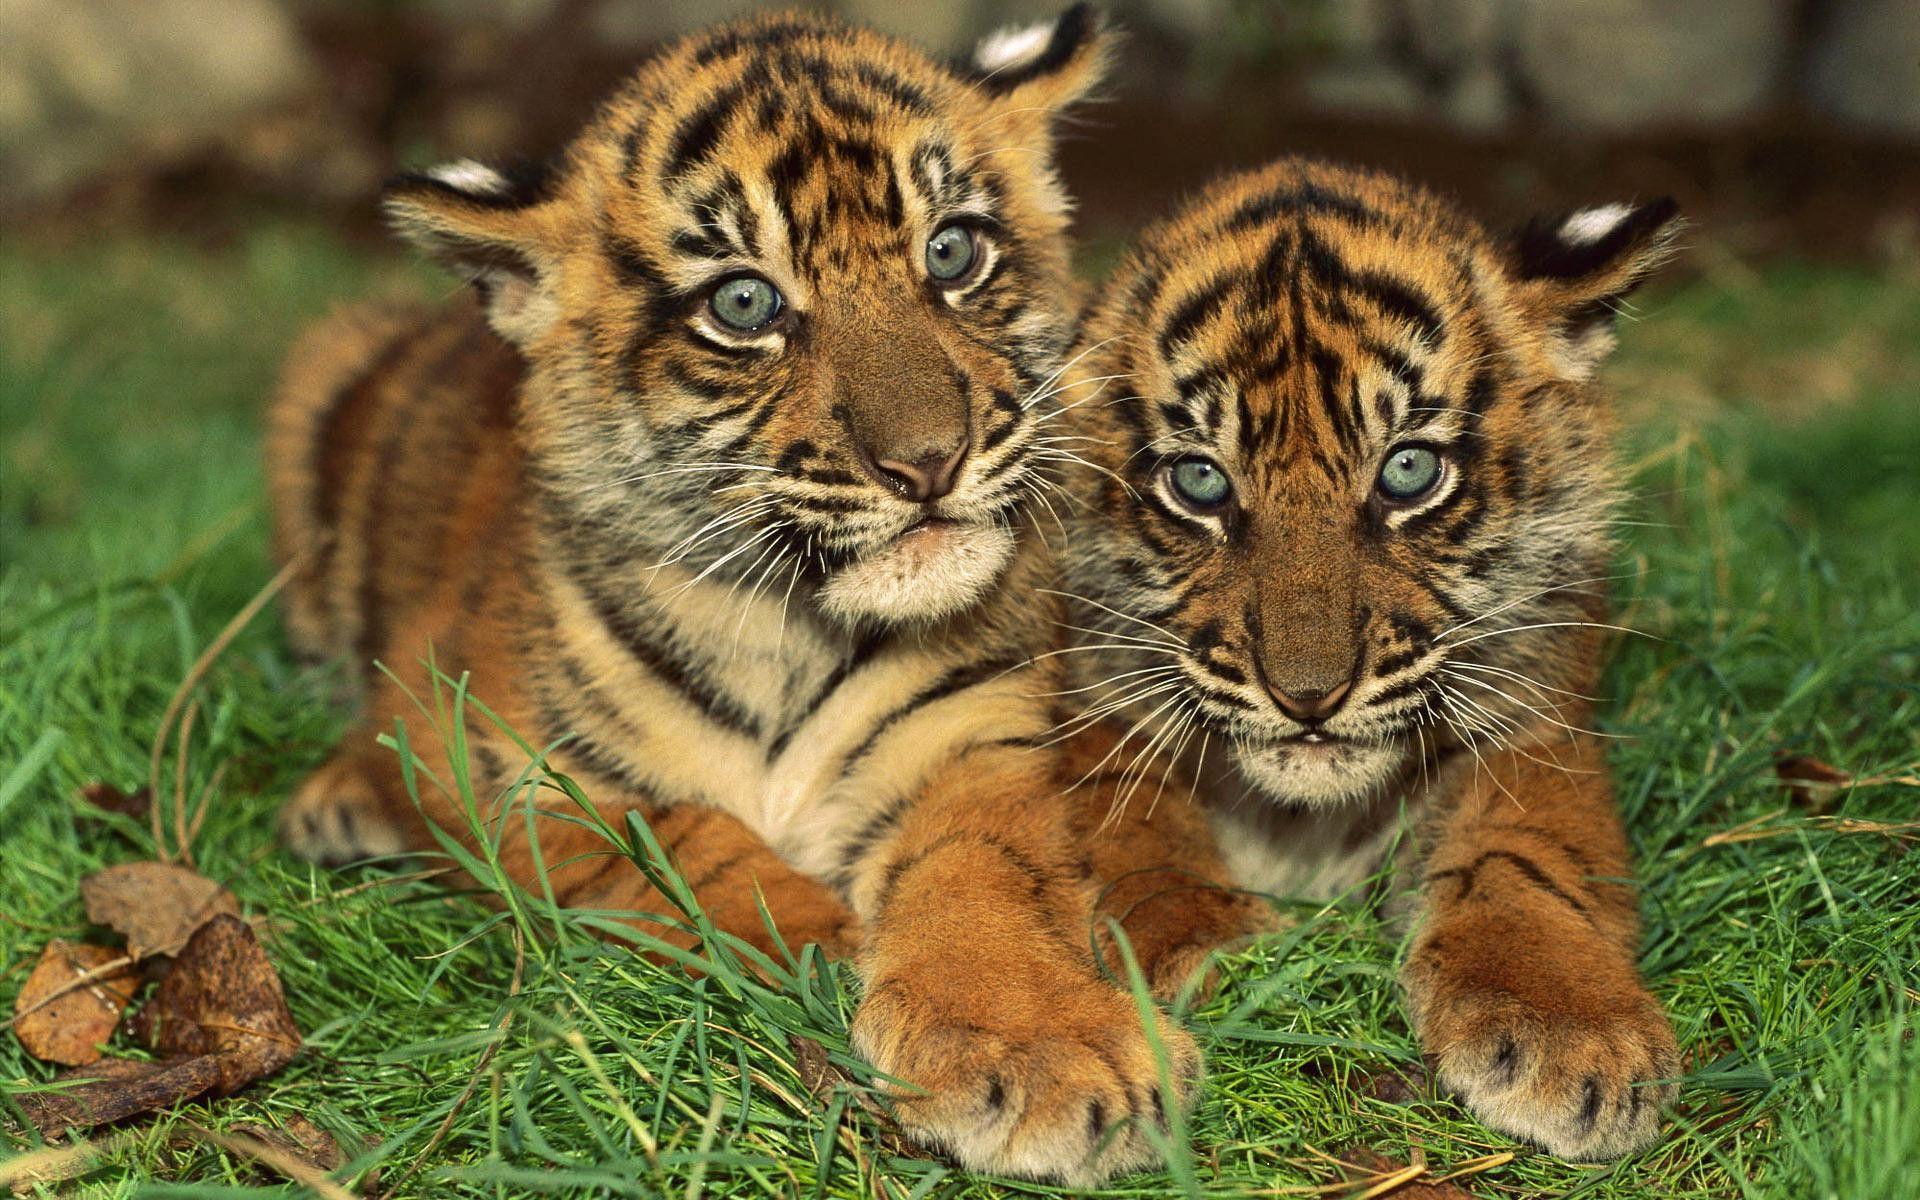 Cute Baby Tigers Image